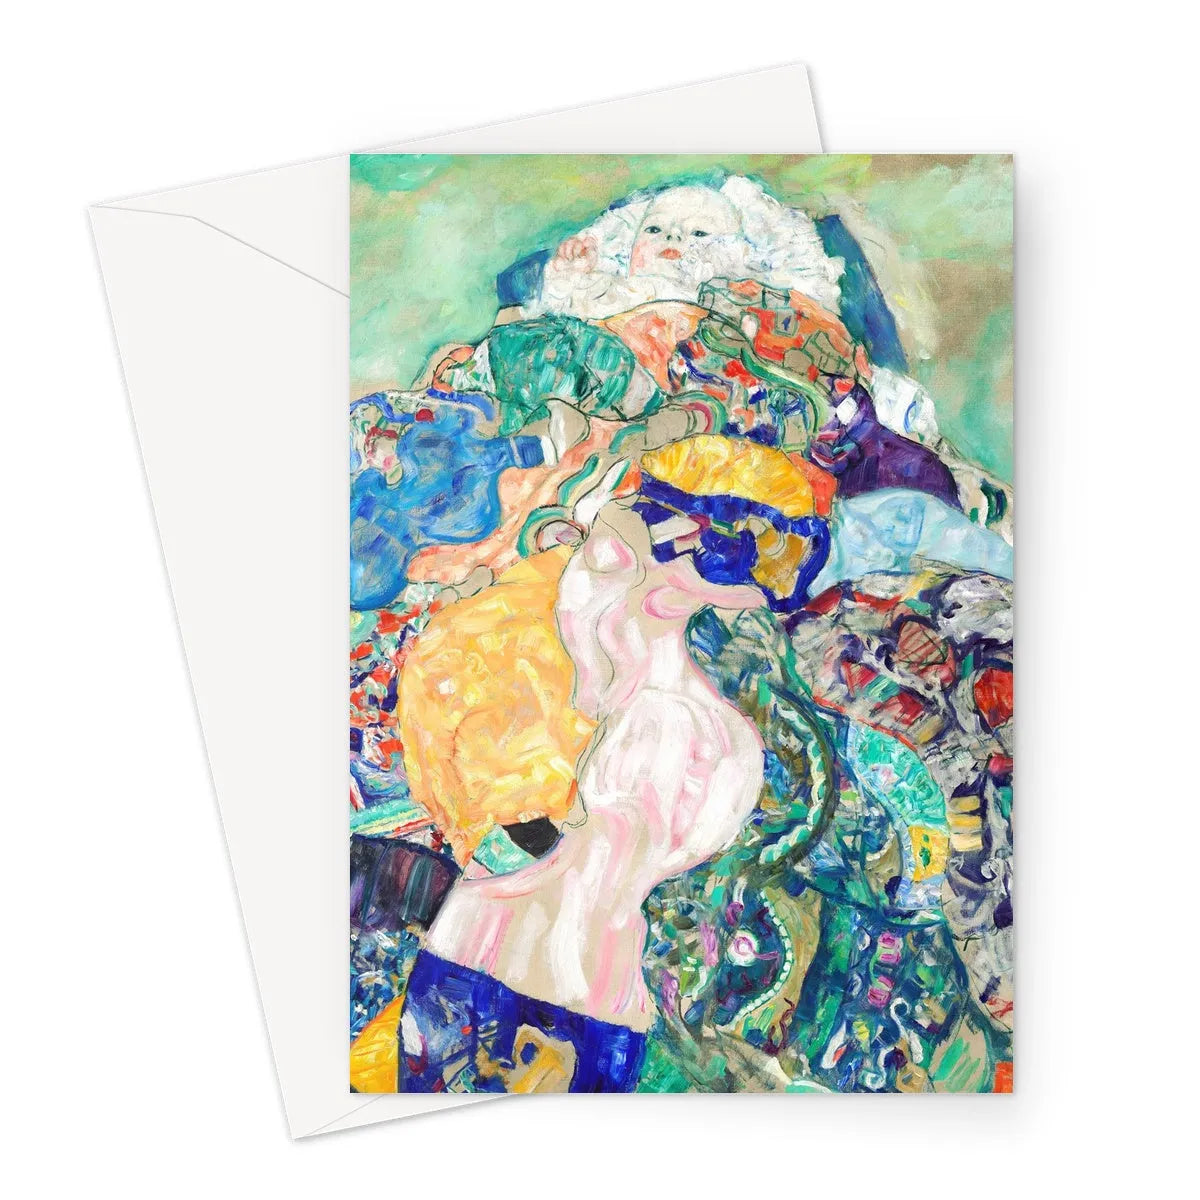 Baby By Gustav Klimt Greeting Card - A5 Portrait / 1 Card - Greeting & Note Cards - Aesthetic Art